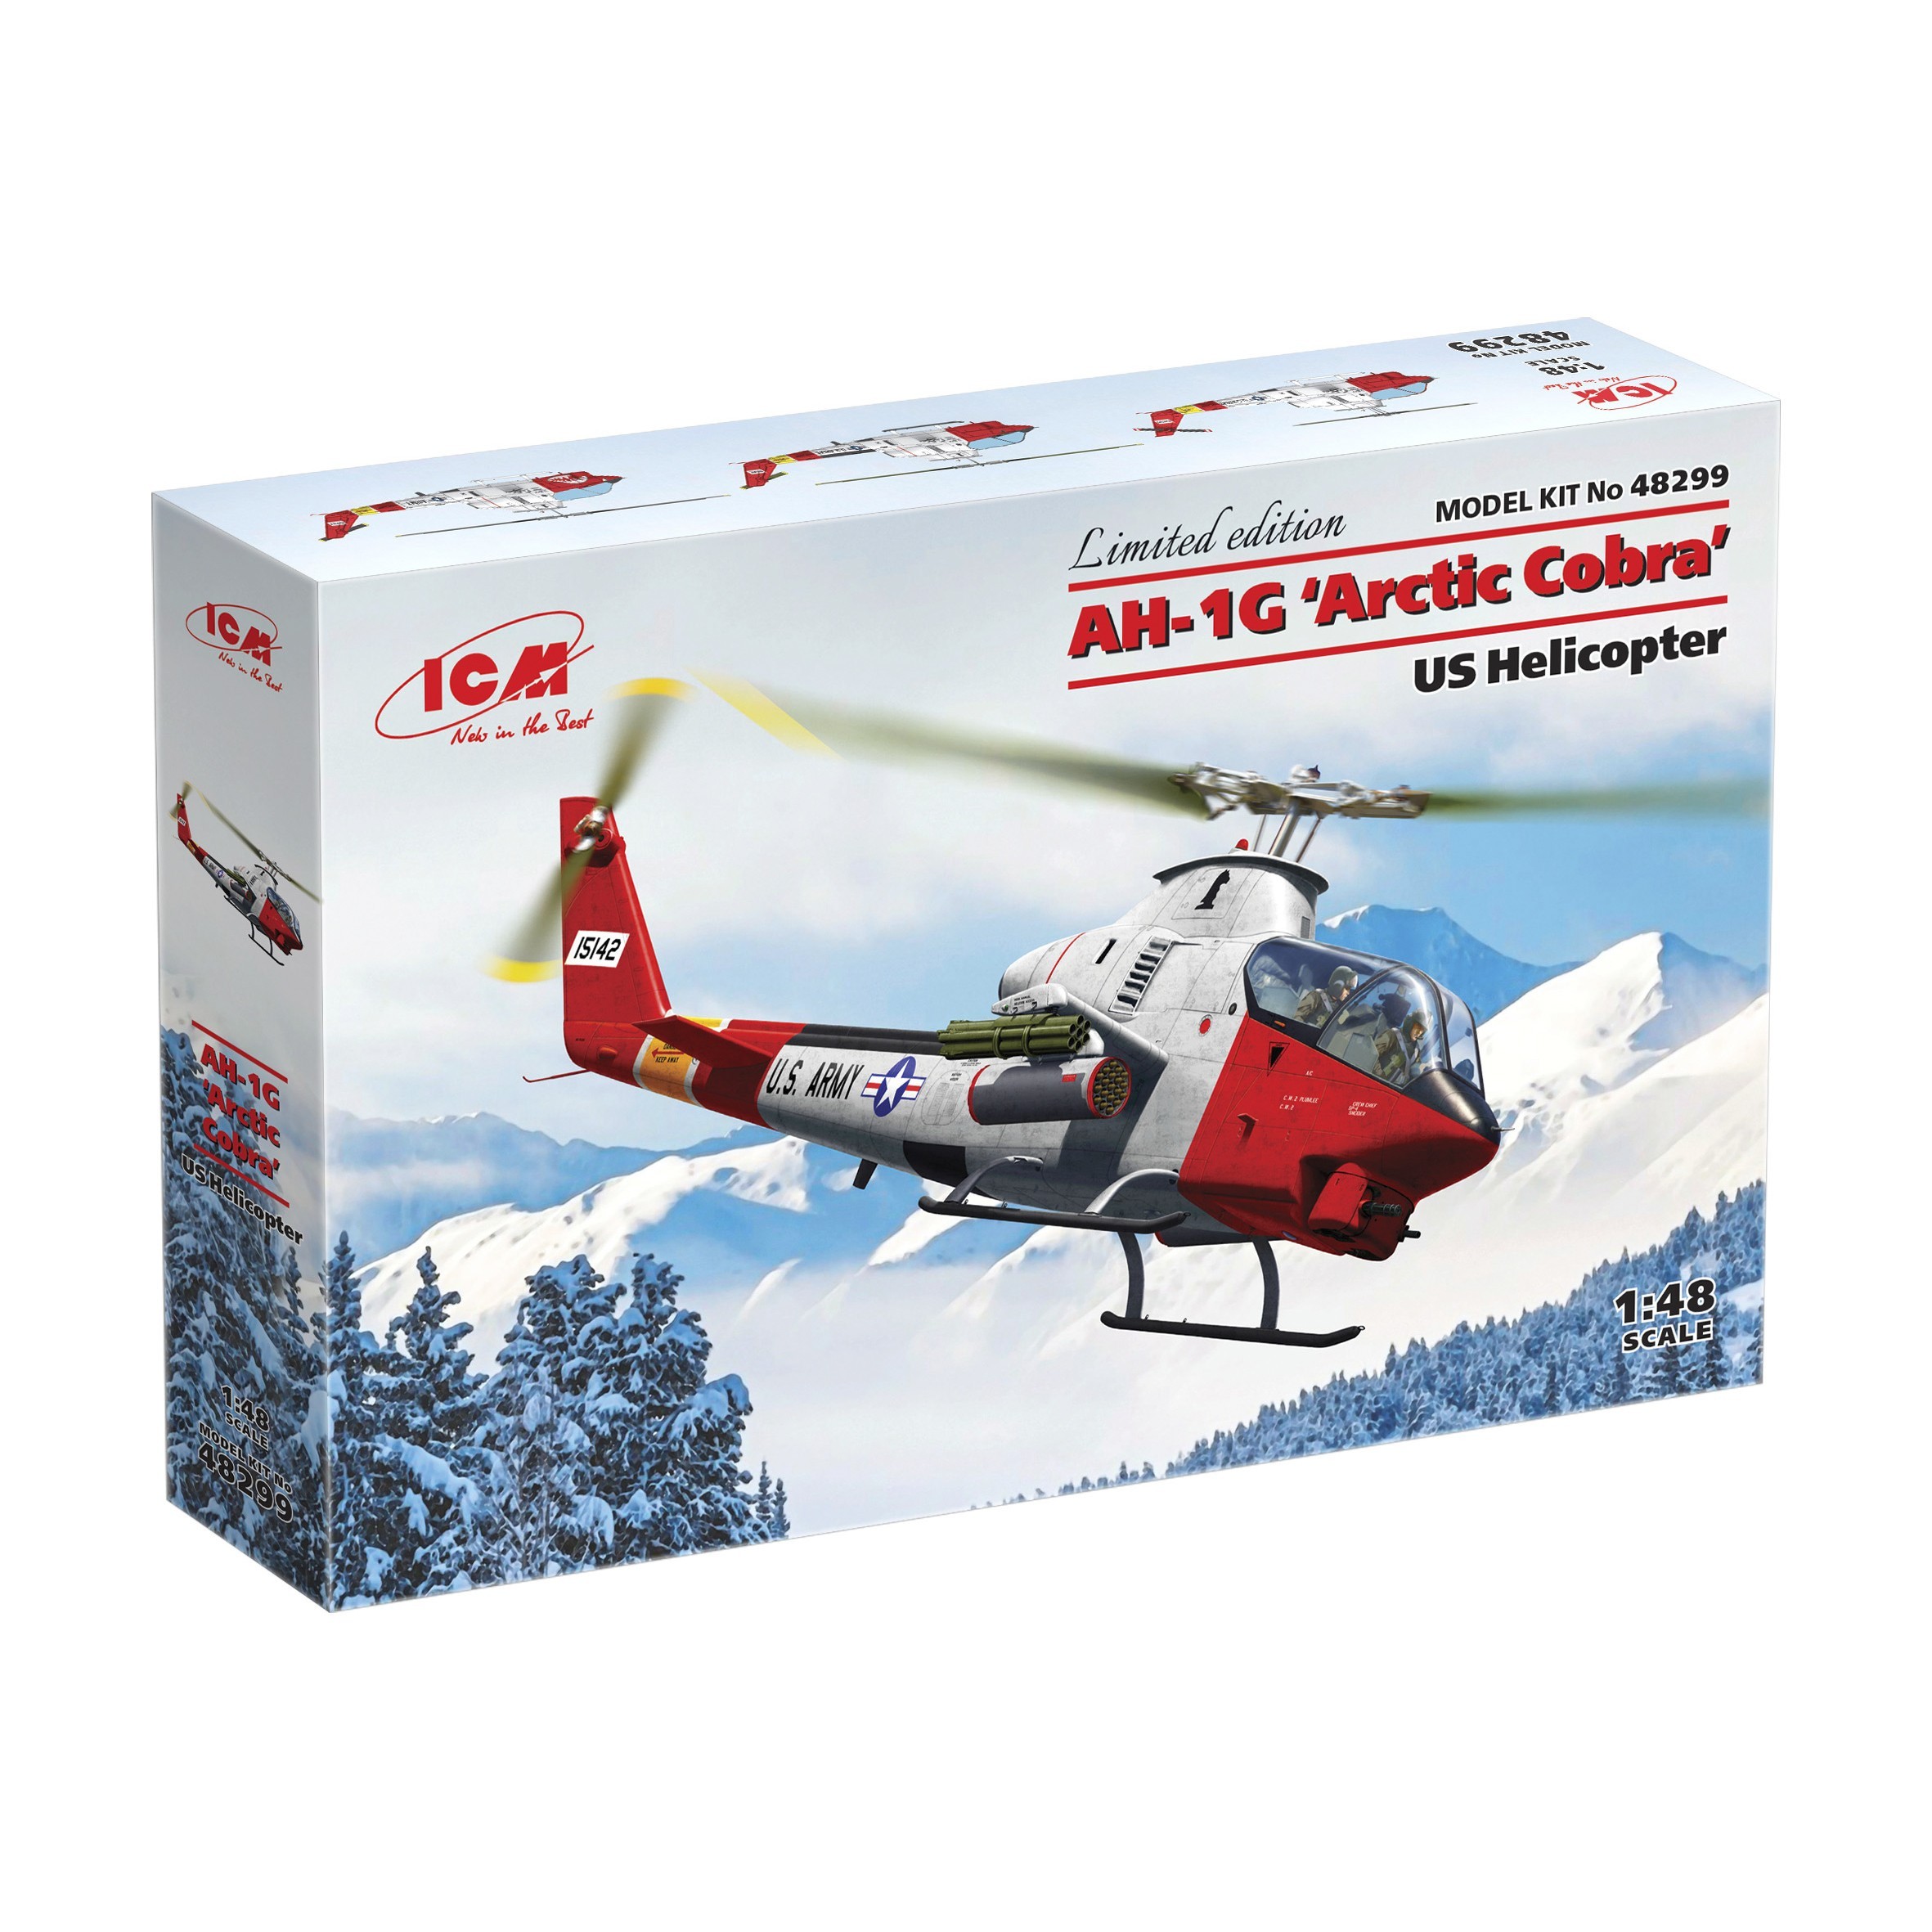 48299 - AH-1G ‘Arctic Cobra’, US Helicopter - 1:48